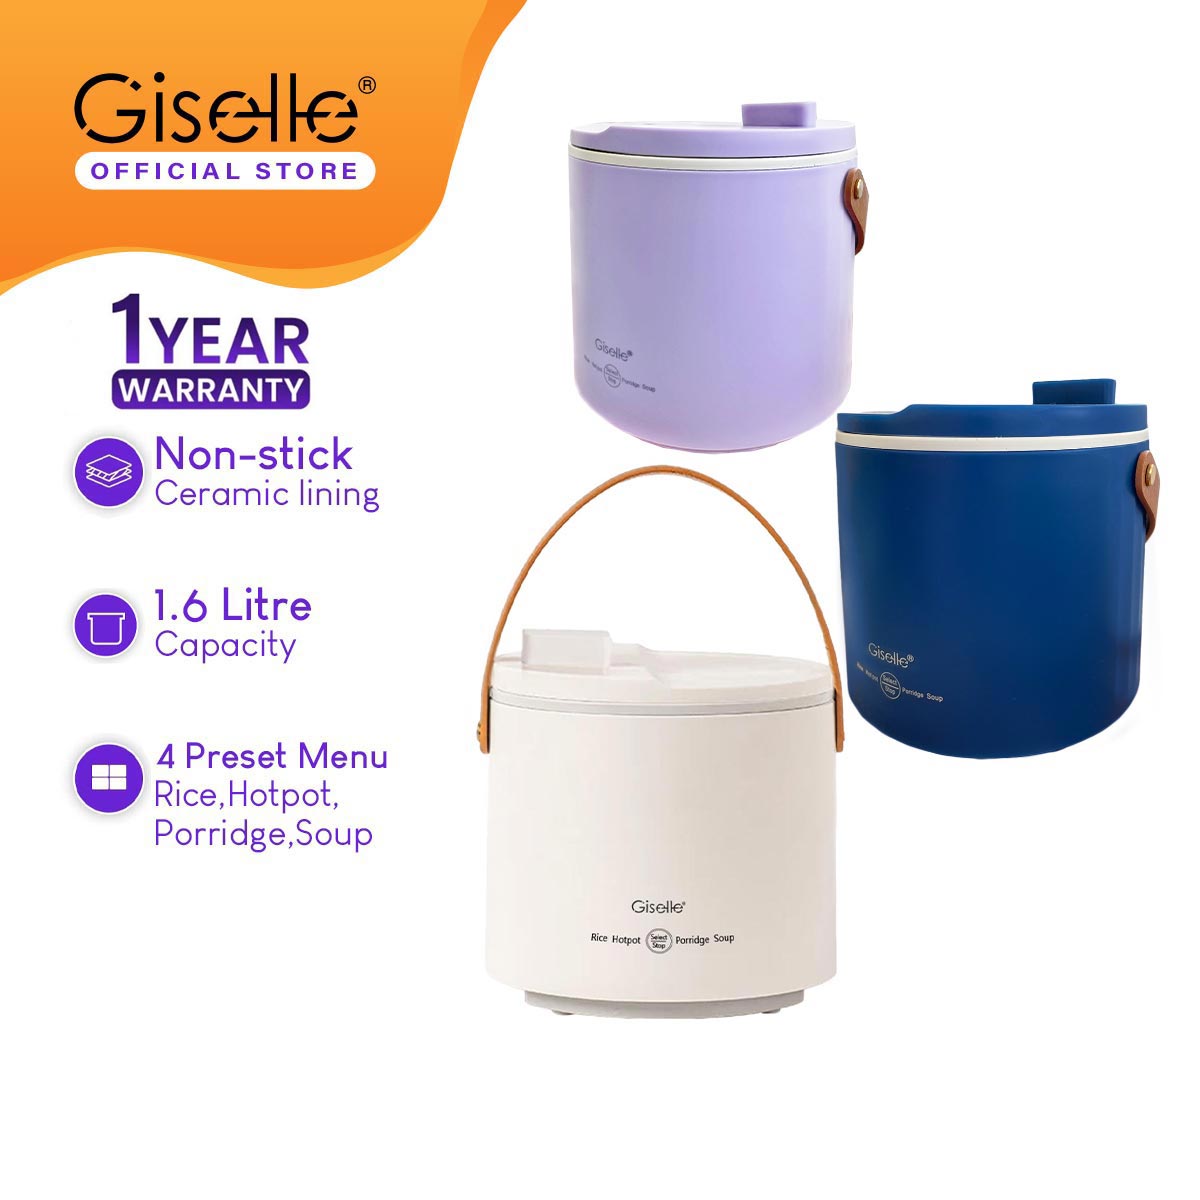 Giselle Digital Touch/Mechanical Portable Electric multifunction Cooker with Ceramic Inner Pot (1.6L) - KEA0379